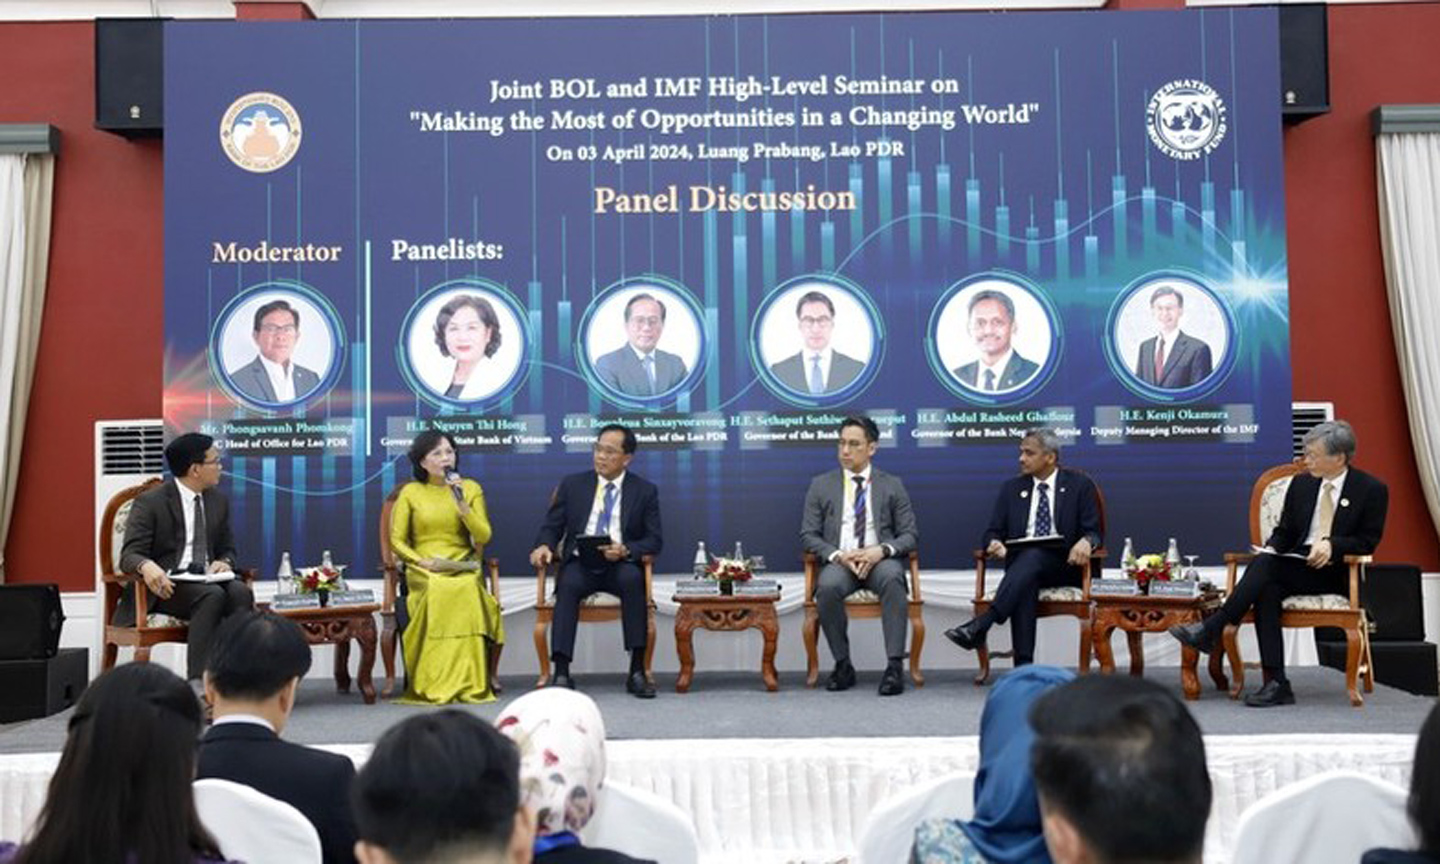 ABO/NDO- Vietnam’s macro-economic achievements were applauded at an international workshop co-organised by the International Monetary Fund (IMF) and the Bank of Laos on April 3 in Luang Prabang.